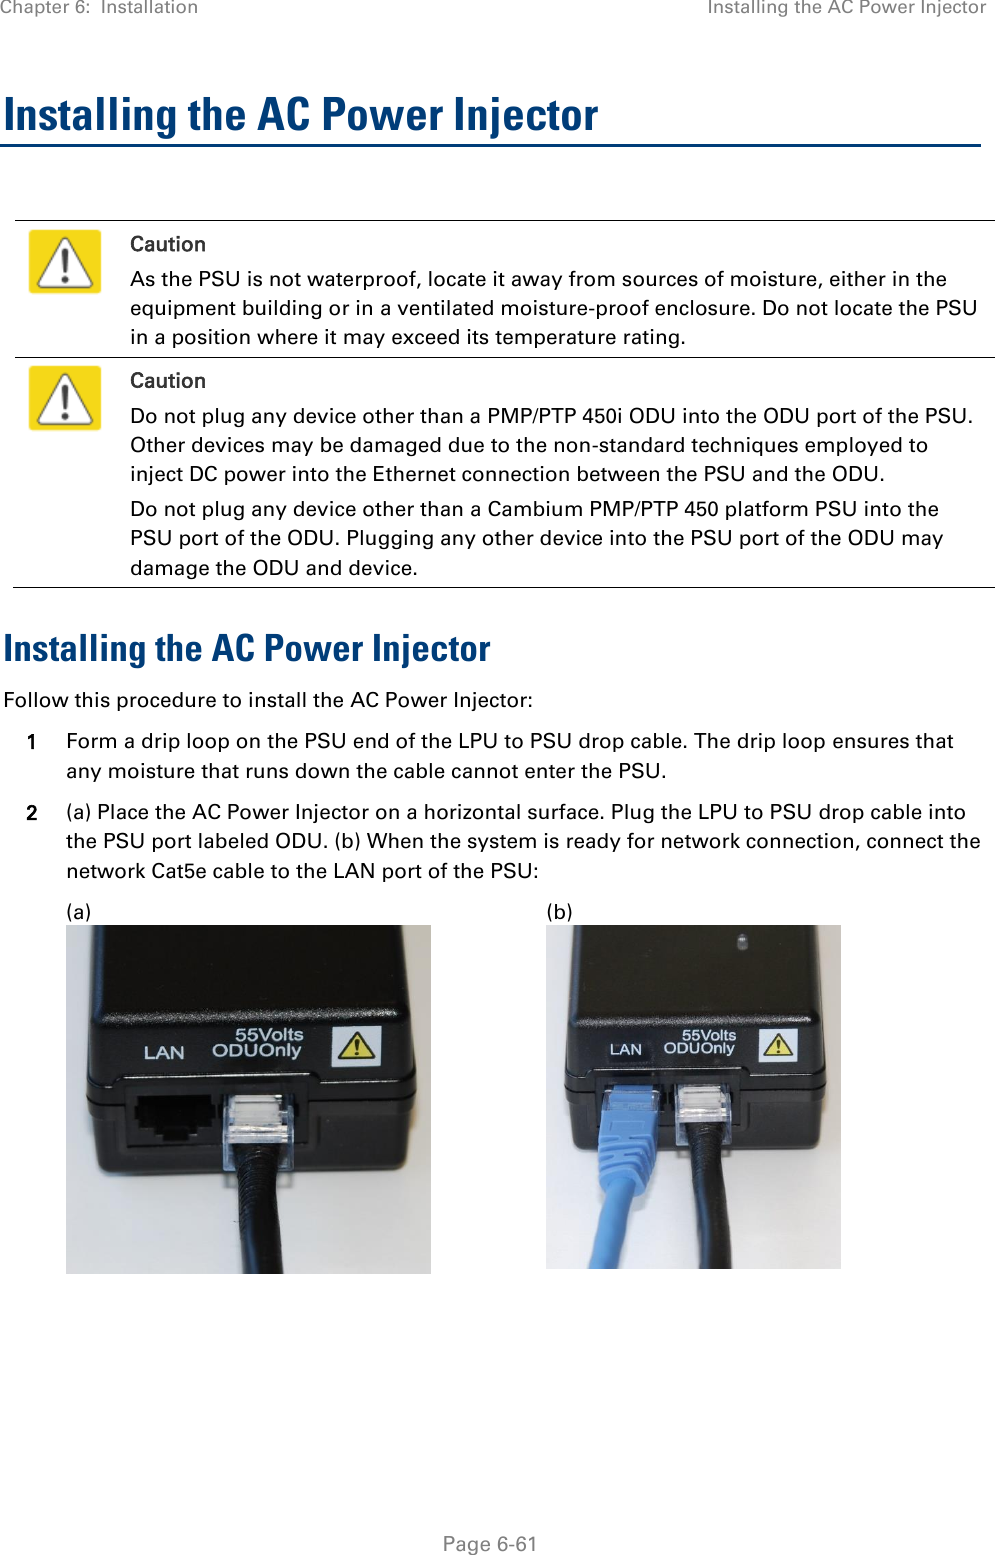 Chapter 6:  Installation Installing the AC Power Injector   Page 6-61 Installing the AC Power Injector   Caution As the PSU is not waterproof, locate it away from sources of moisture, either in the equipment building or in a ventilated moisture-proof enclosure. Do not locate the PSU in a position where it may exceed its temperature rating.  Caution Do not plug any device other than a PMP/PTP 450i ODU into the ODU port of the PSU. Other devices may be damaged due to the non-standard techniques employed to inject DC power into the Ethernet connection between the PSU and the ODU. Do not plug any device other than a Cambium PMP/PTP 450 platform PSU into the PSU port of the ODU. Plugging any other device into the PSU port of the ODU may damage the ODU and device. Installing the AC Power Injector Follow this procedure to install the AC Power Injector: 1 Form a drip loop on the PSU end of the LPU to PSU drop cable. The drip loop ensures that any moisture that runs down the cable cannot enter the PSU. 2 (a) Place the AC Power Injector on a horizontal surface. Plug the LPU to PSU drop cable into the PSU port labeled ODU. (b) When the system is ready for network connection, connect the network Cat5e cable to the LAN port of the PSU:   (a)  (b)      